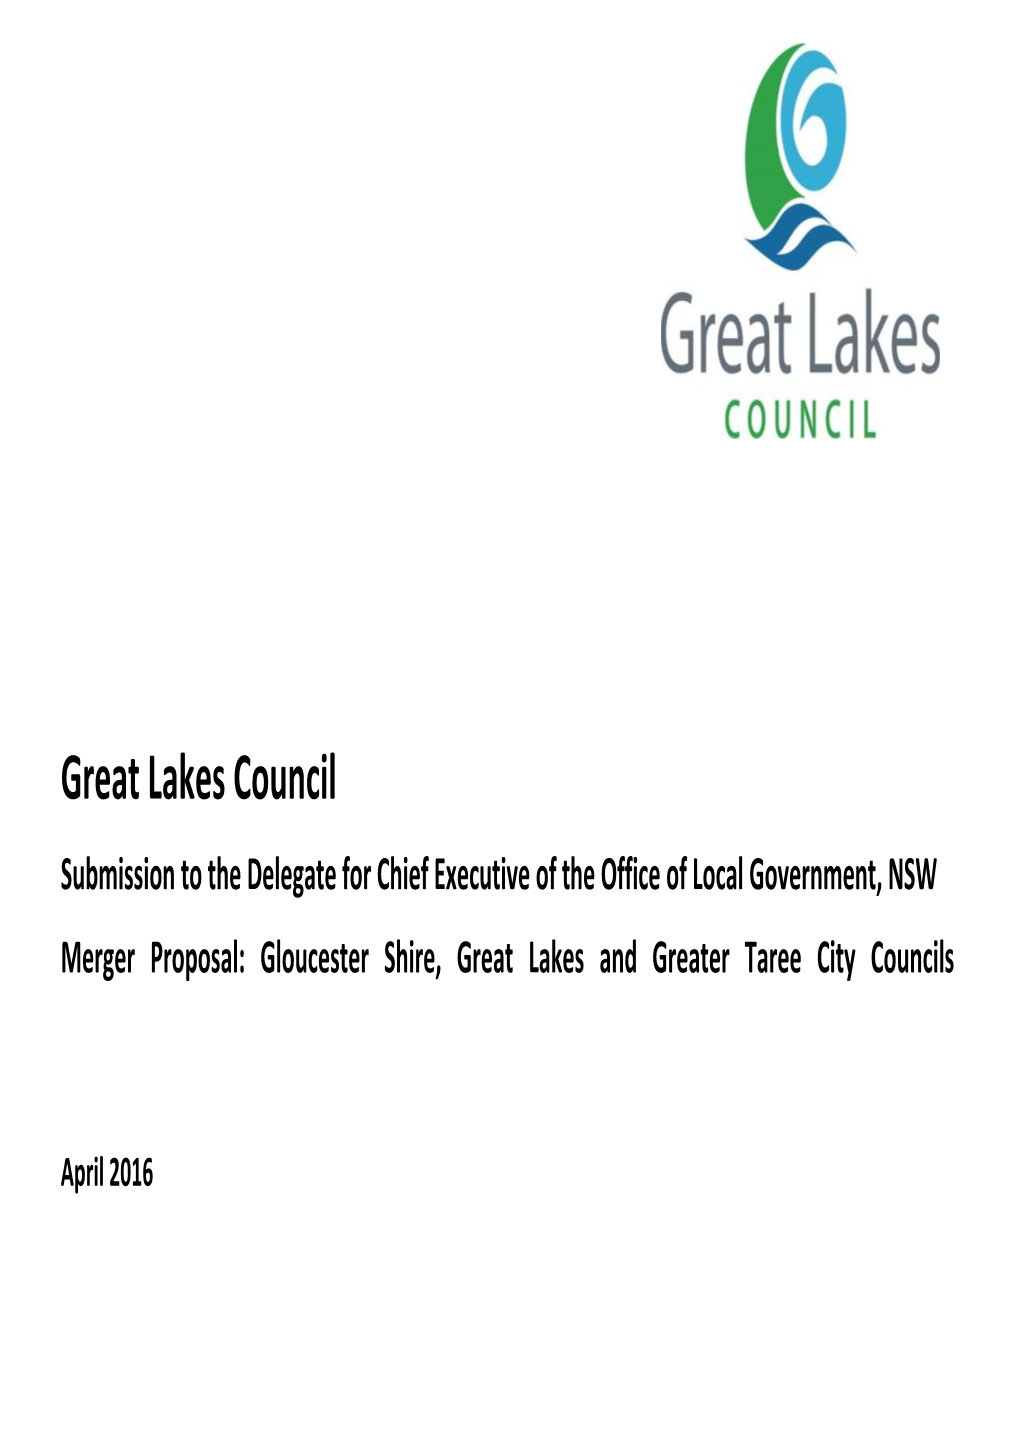 Great Lakes Council Boundary Commission